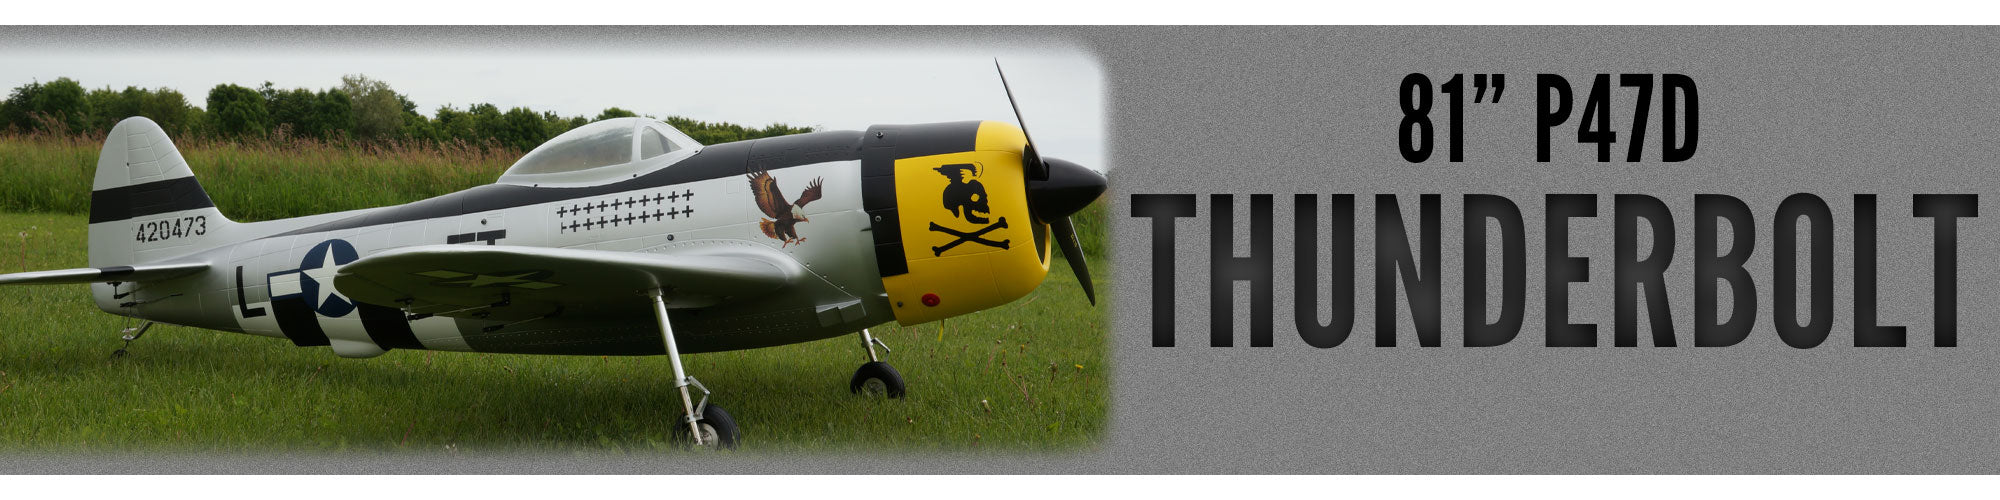 shop our Thunderbolt RC plane as part of our line of giant scale RC planes